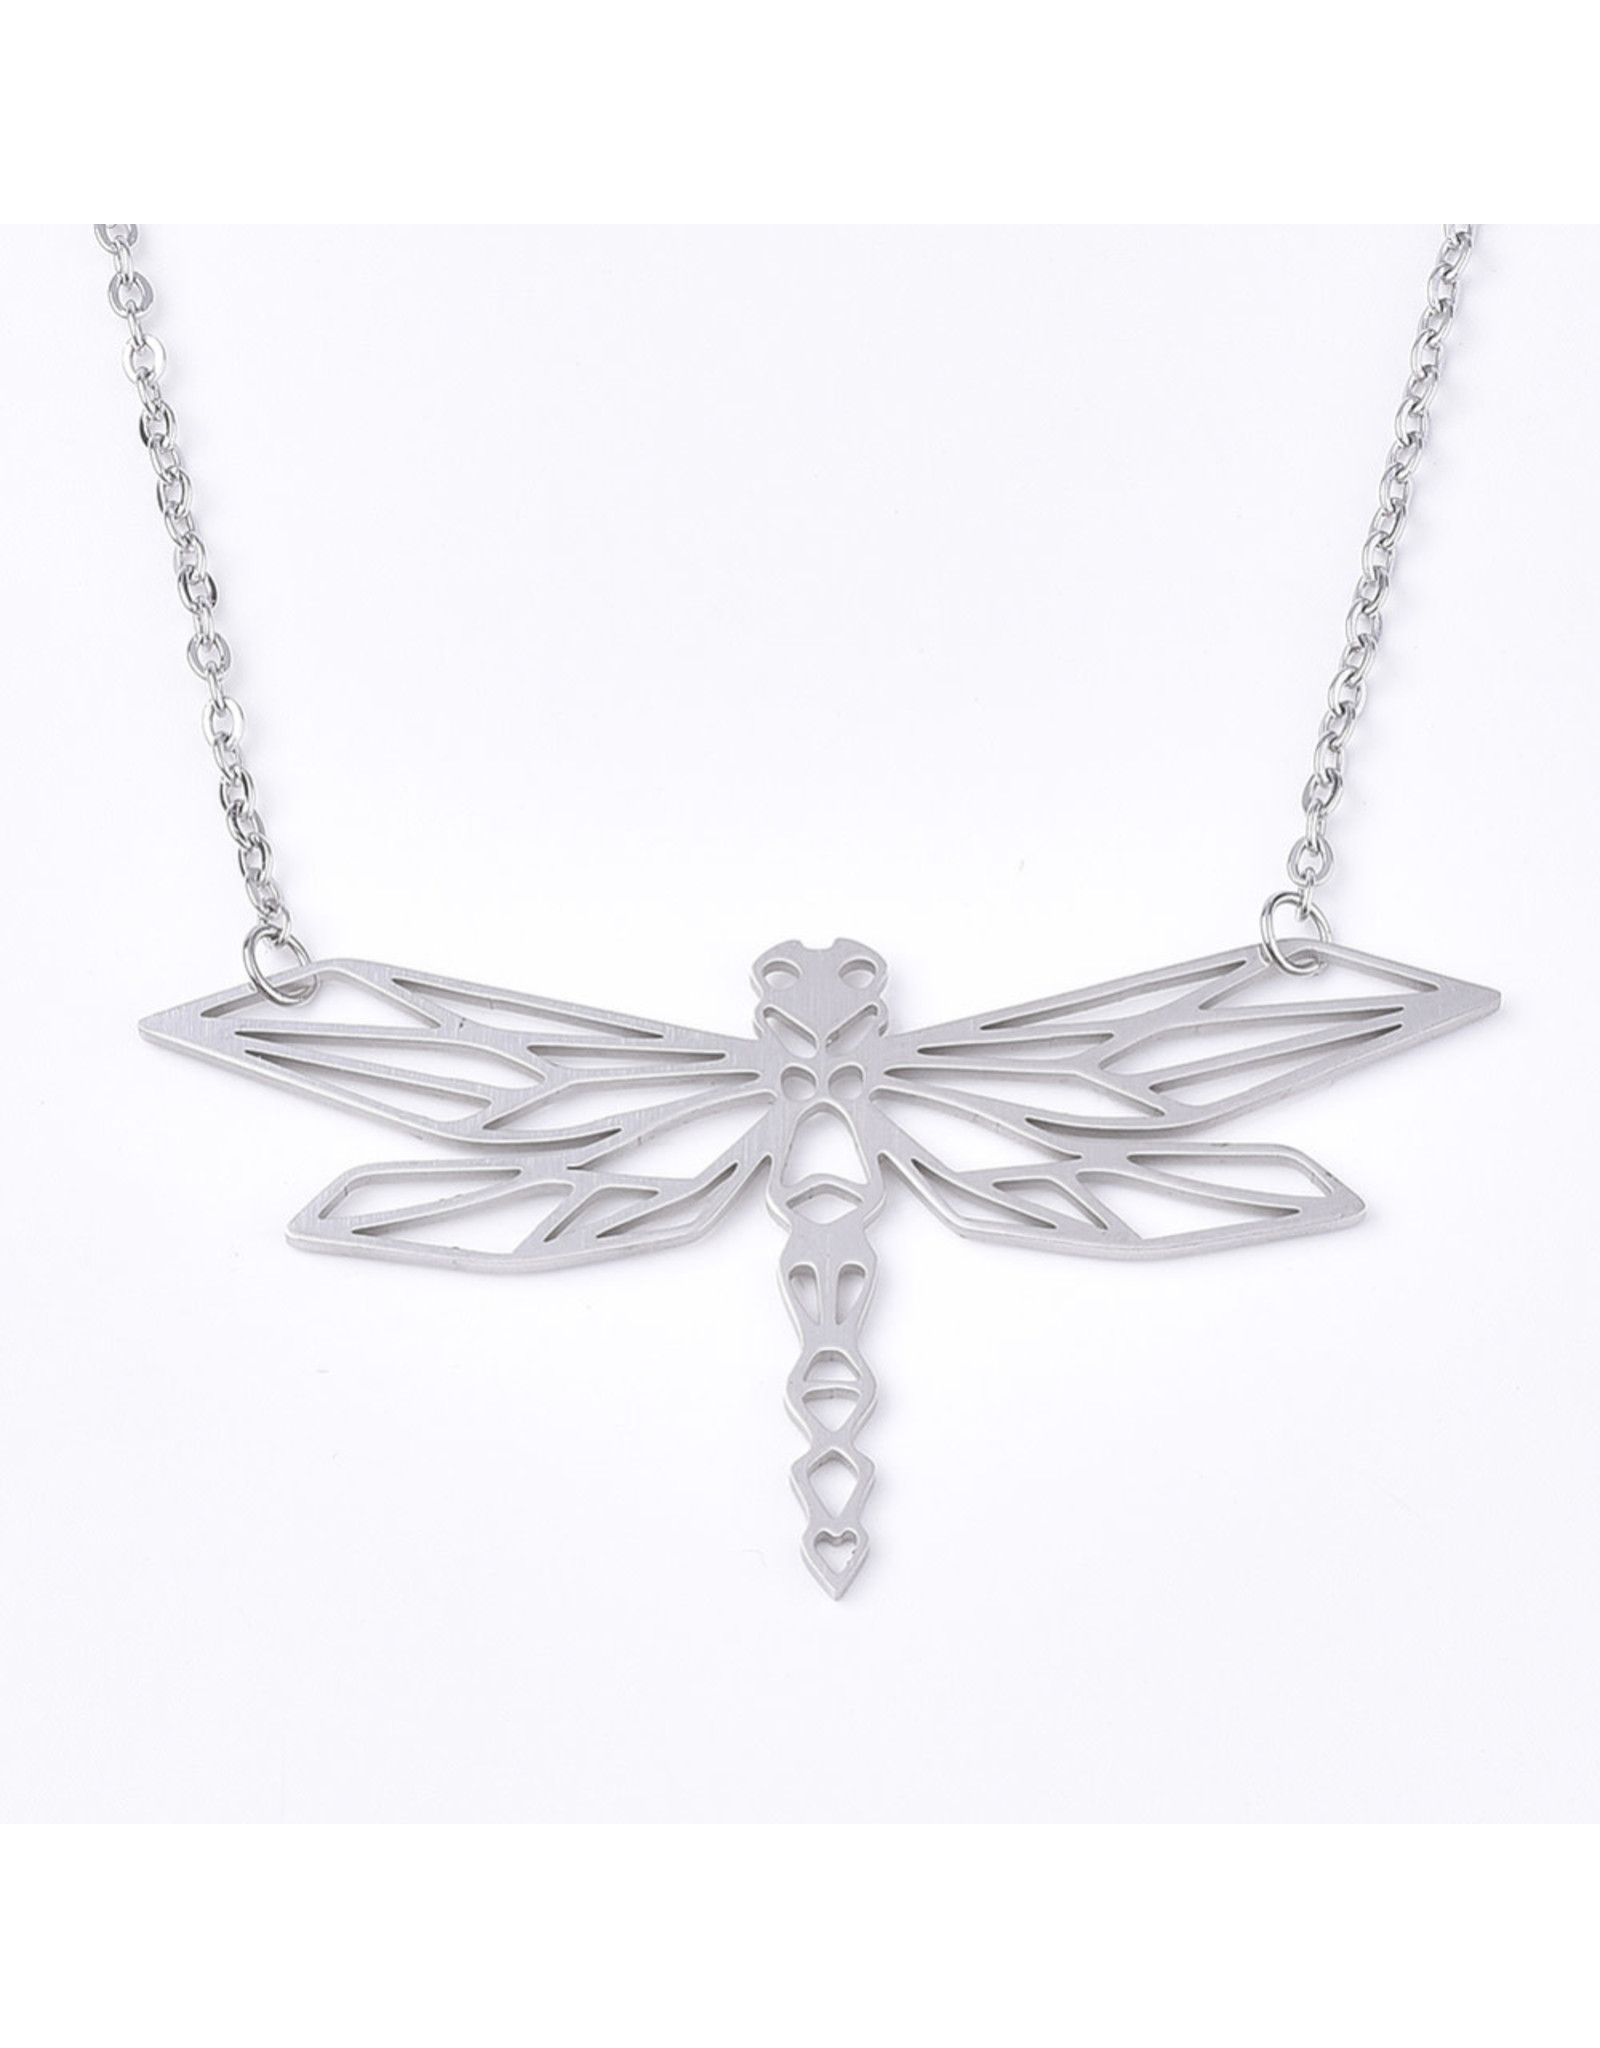 Dragonfly  Necklace Stainless Steel   32x60mm  18'' x1